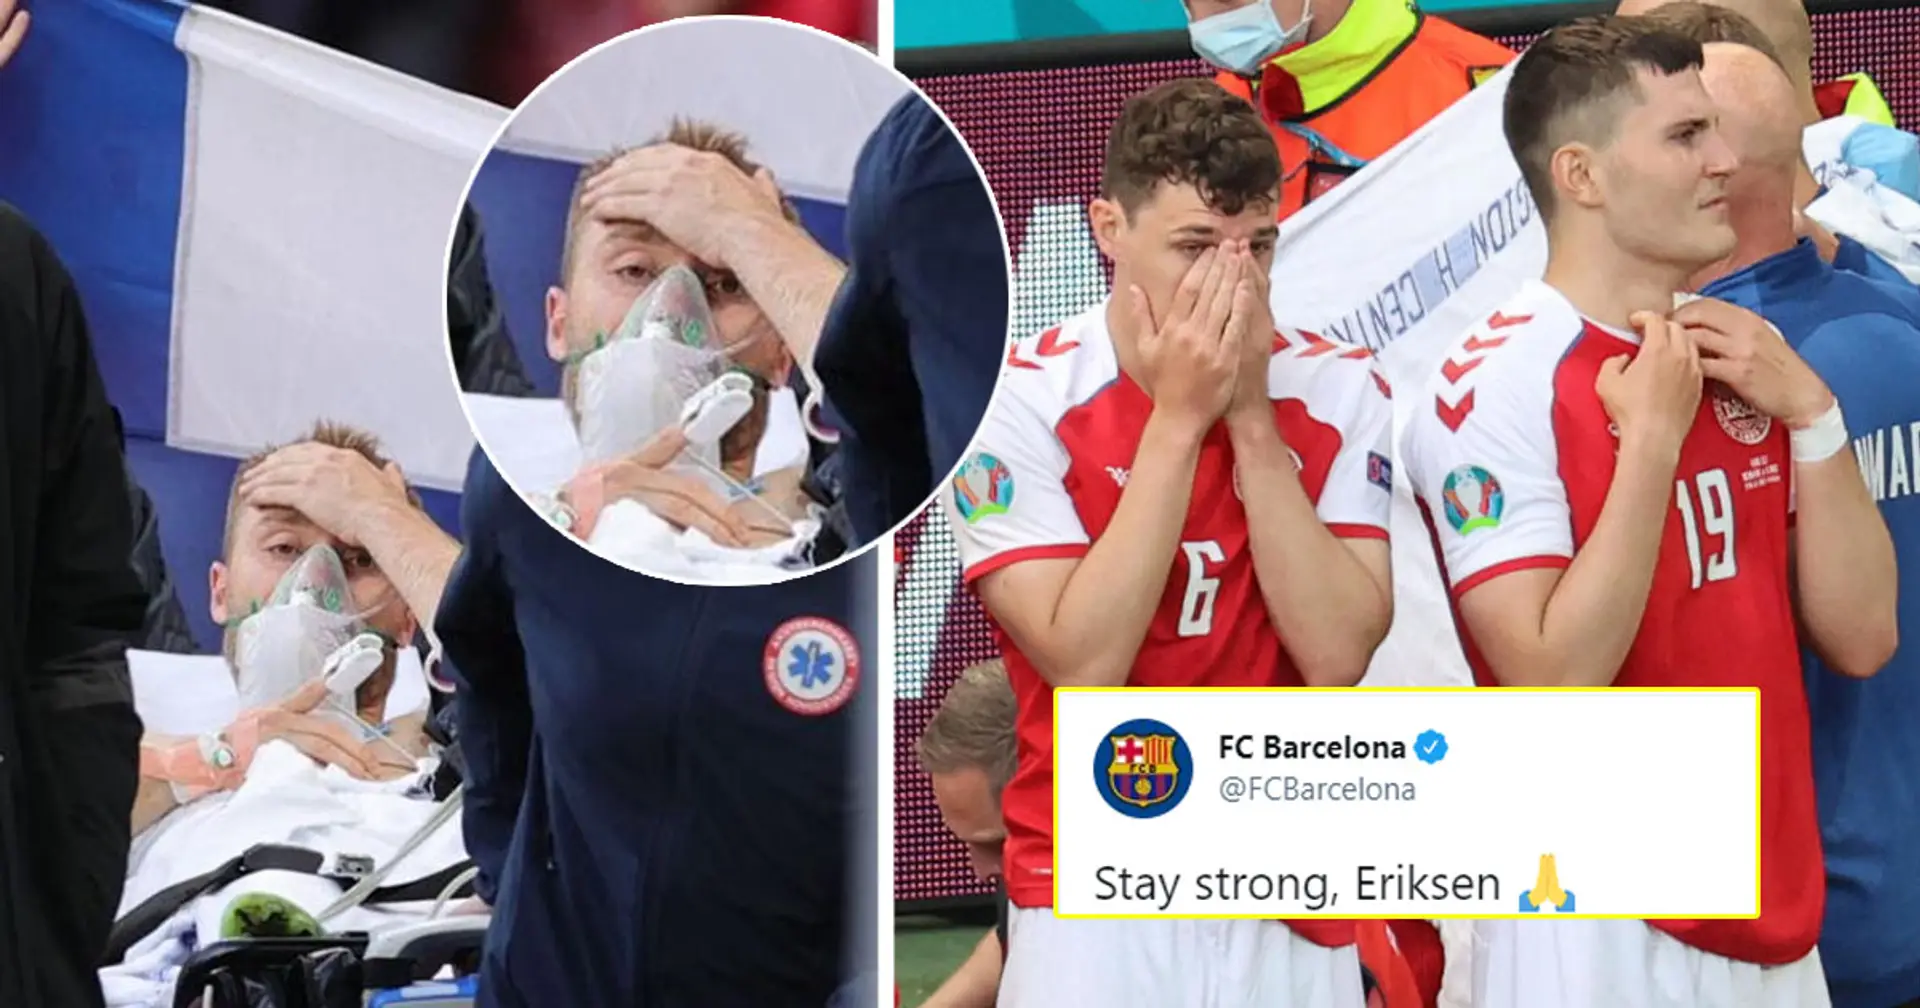 Barcelona, Fabregas & more: Football world comes together to show support as Eriksen collapses on pitch